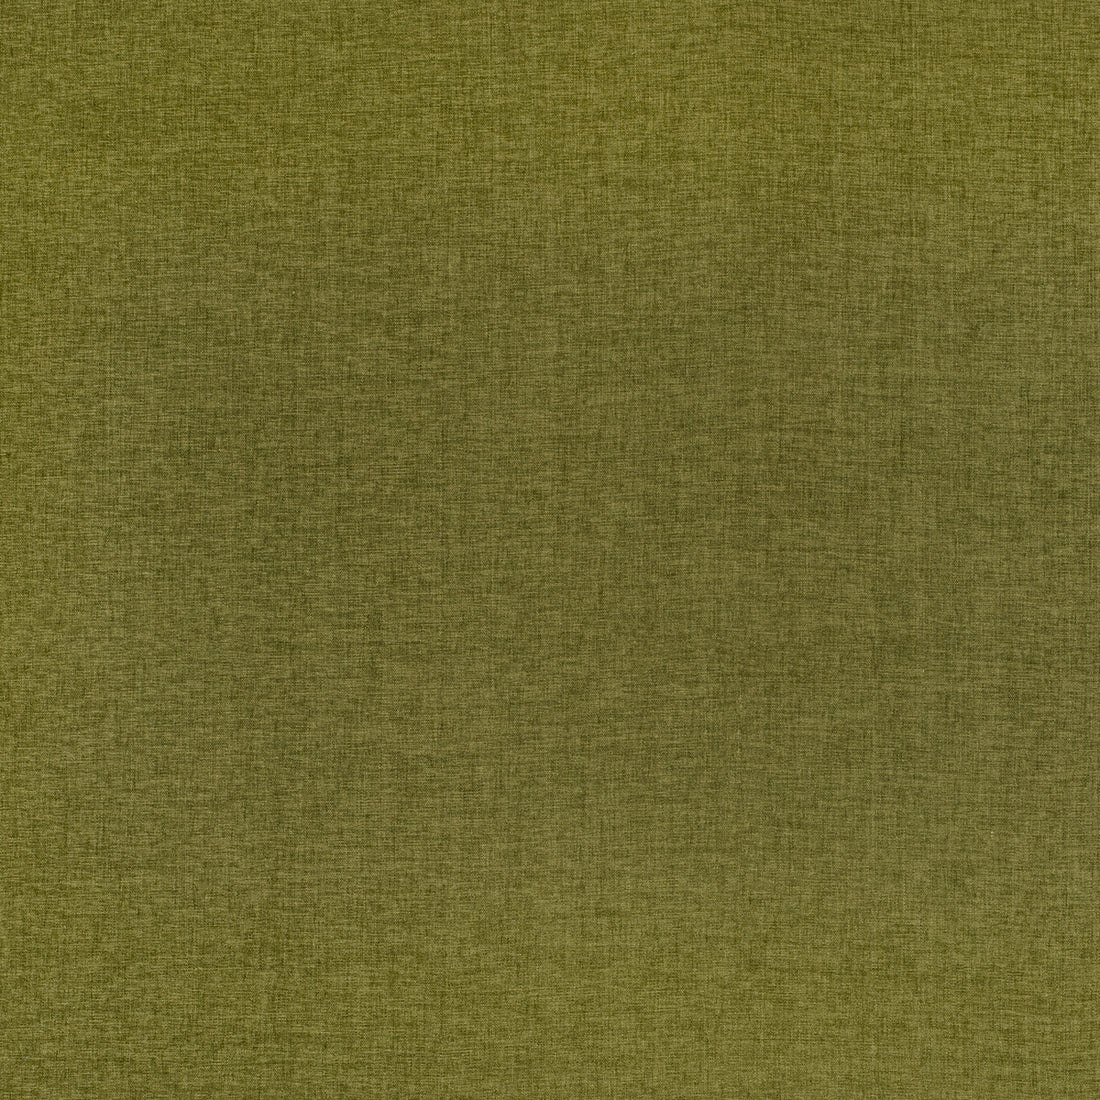 Kravet Smart fabric in 36095-130 color - pattern 36095.130.0 - by Kravet Smart in the Eco-Friendly Chenille collection